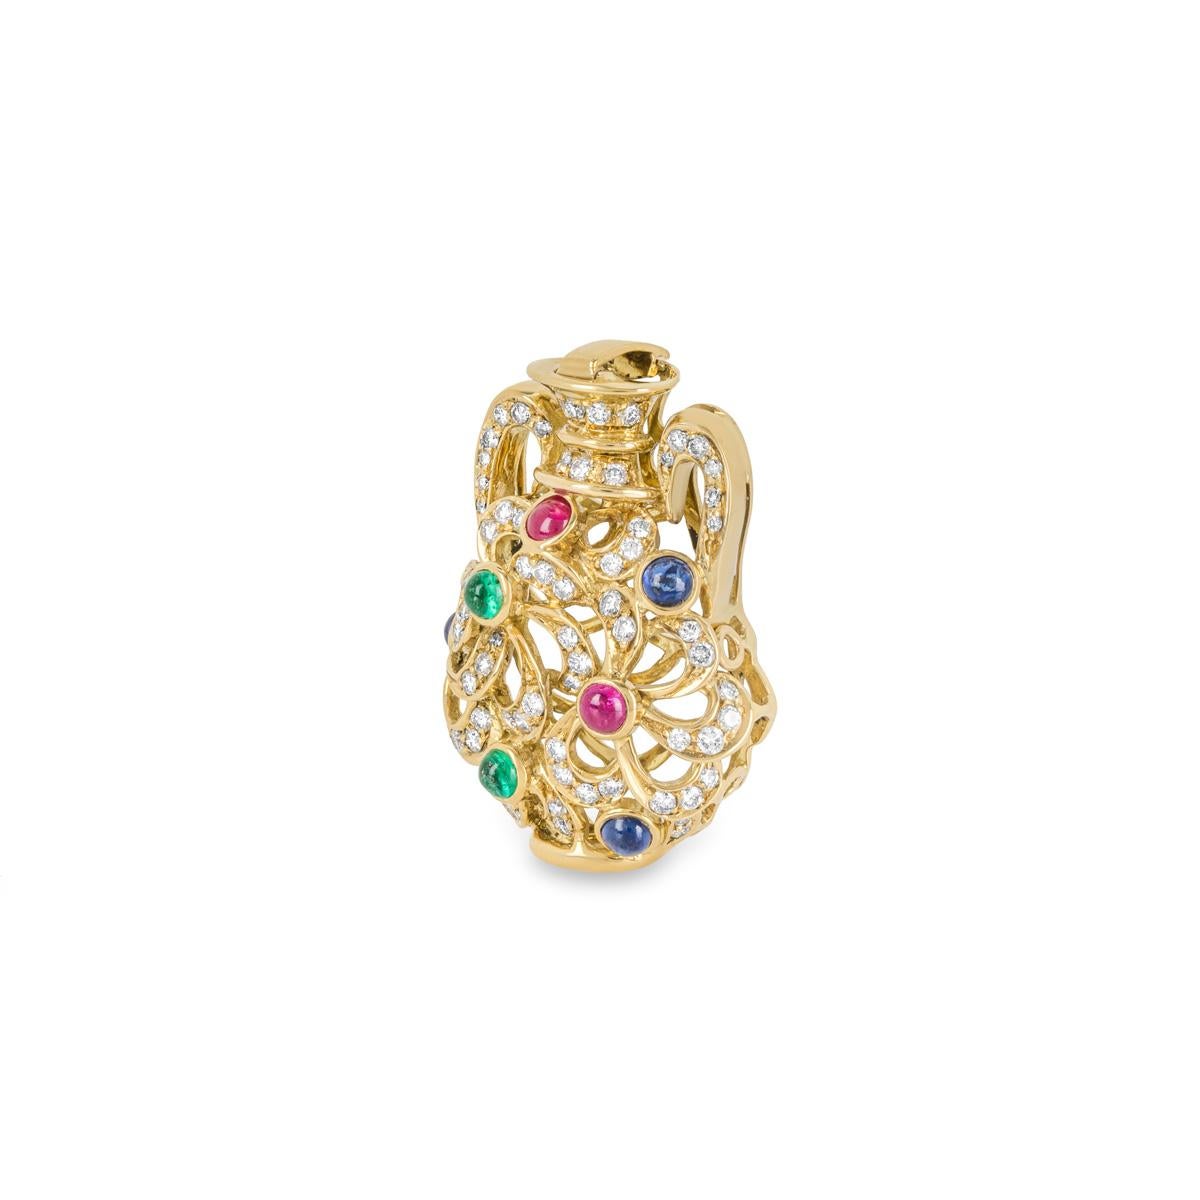 An alluring 18k yellow gold diamond and multi-gem pendant. The openwork vase shape pendant consists of diamonds, sapphires, rubies and tourmalines. The pendant has 66 round brilliant cut diamonds, totalling approximately 1.32ct. The sapphires,